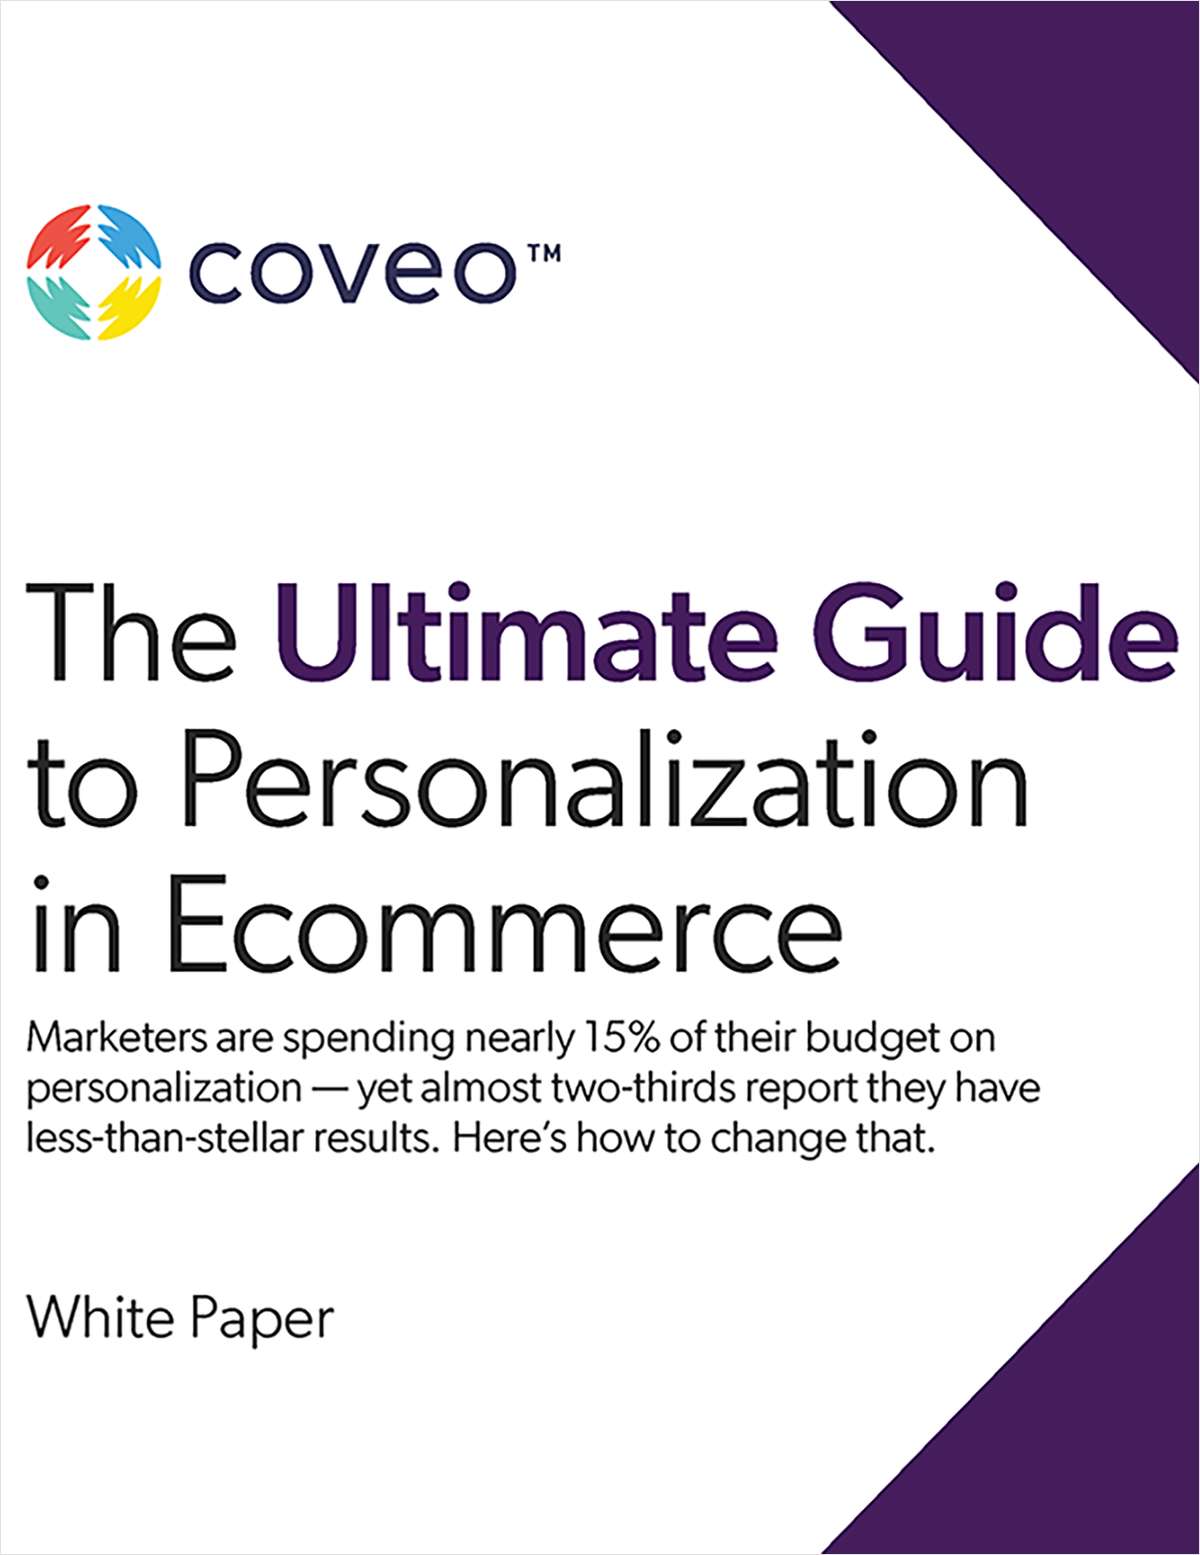 The Ultimate Guide to Personalization in Ecommerce